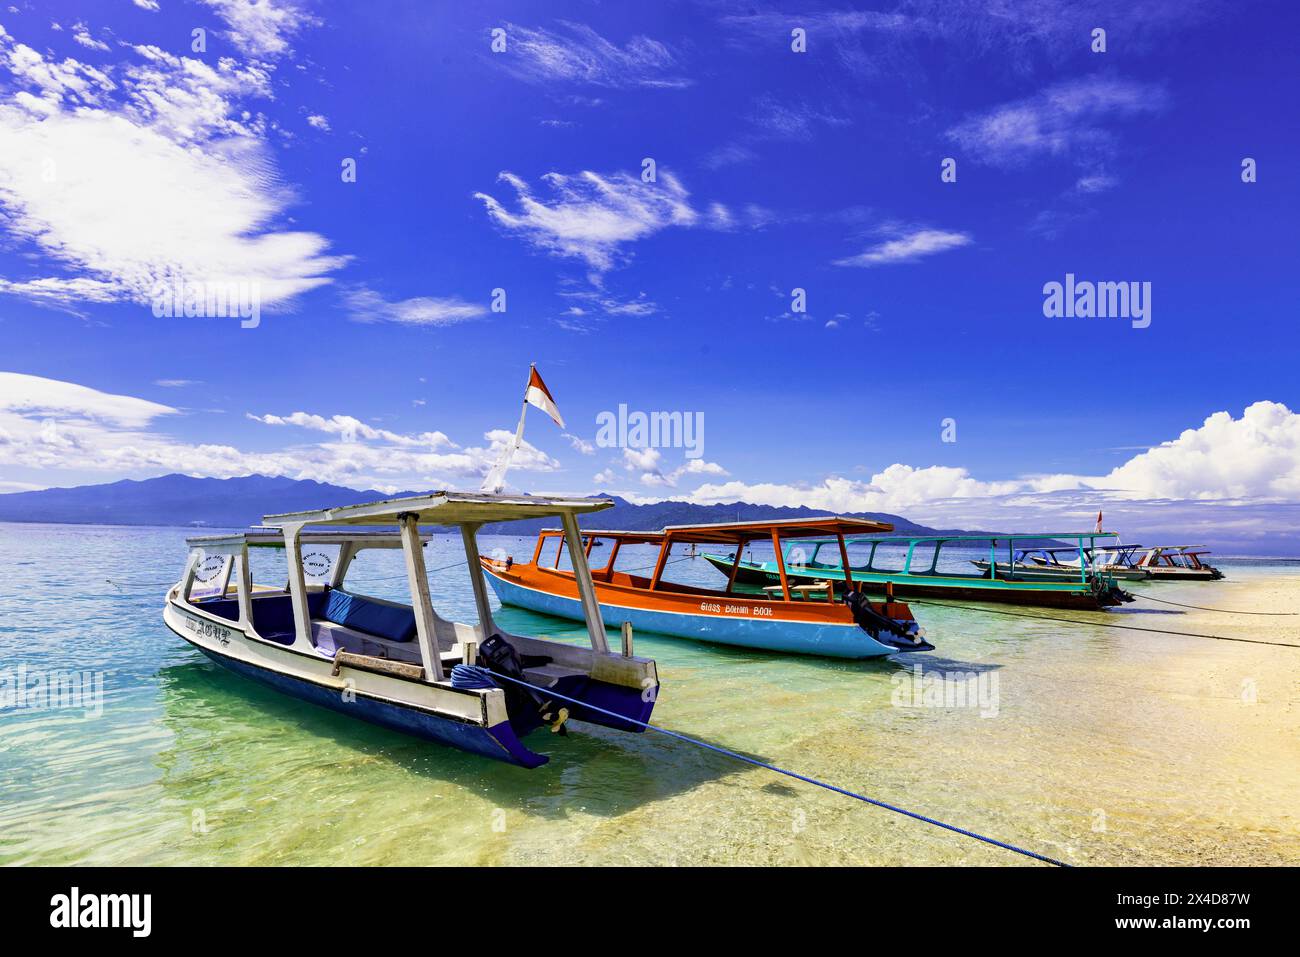 Gili Trawangan Island off the coast of Lombok, Indonesia. White sand, clear warm water with a laid back tropical atmosphere. (Editorial Use Only) Stock Photo